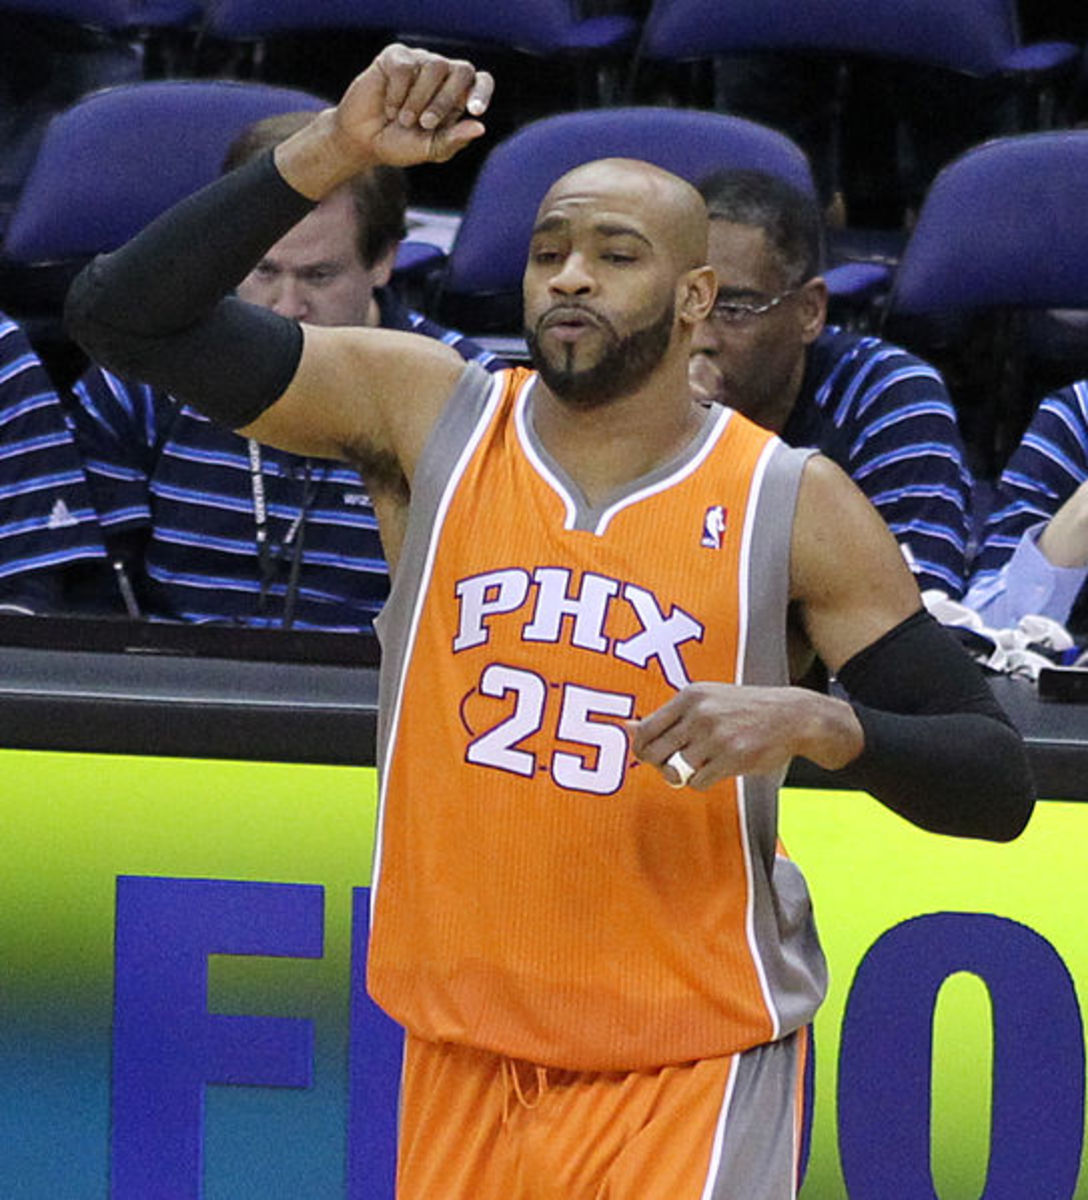 Vince Carter is one of the most electrifying players of all time.